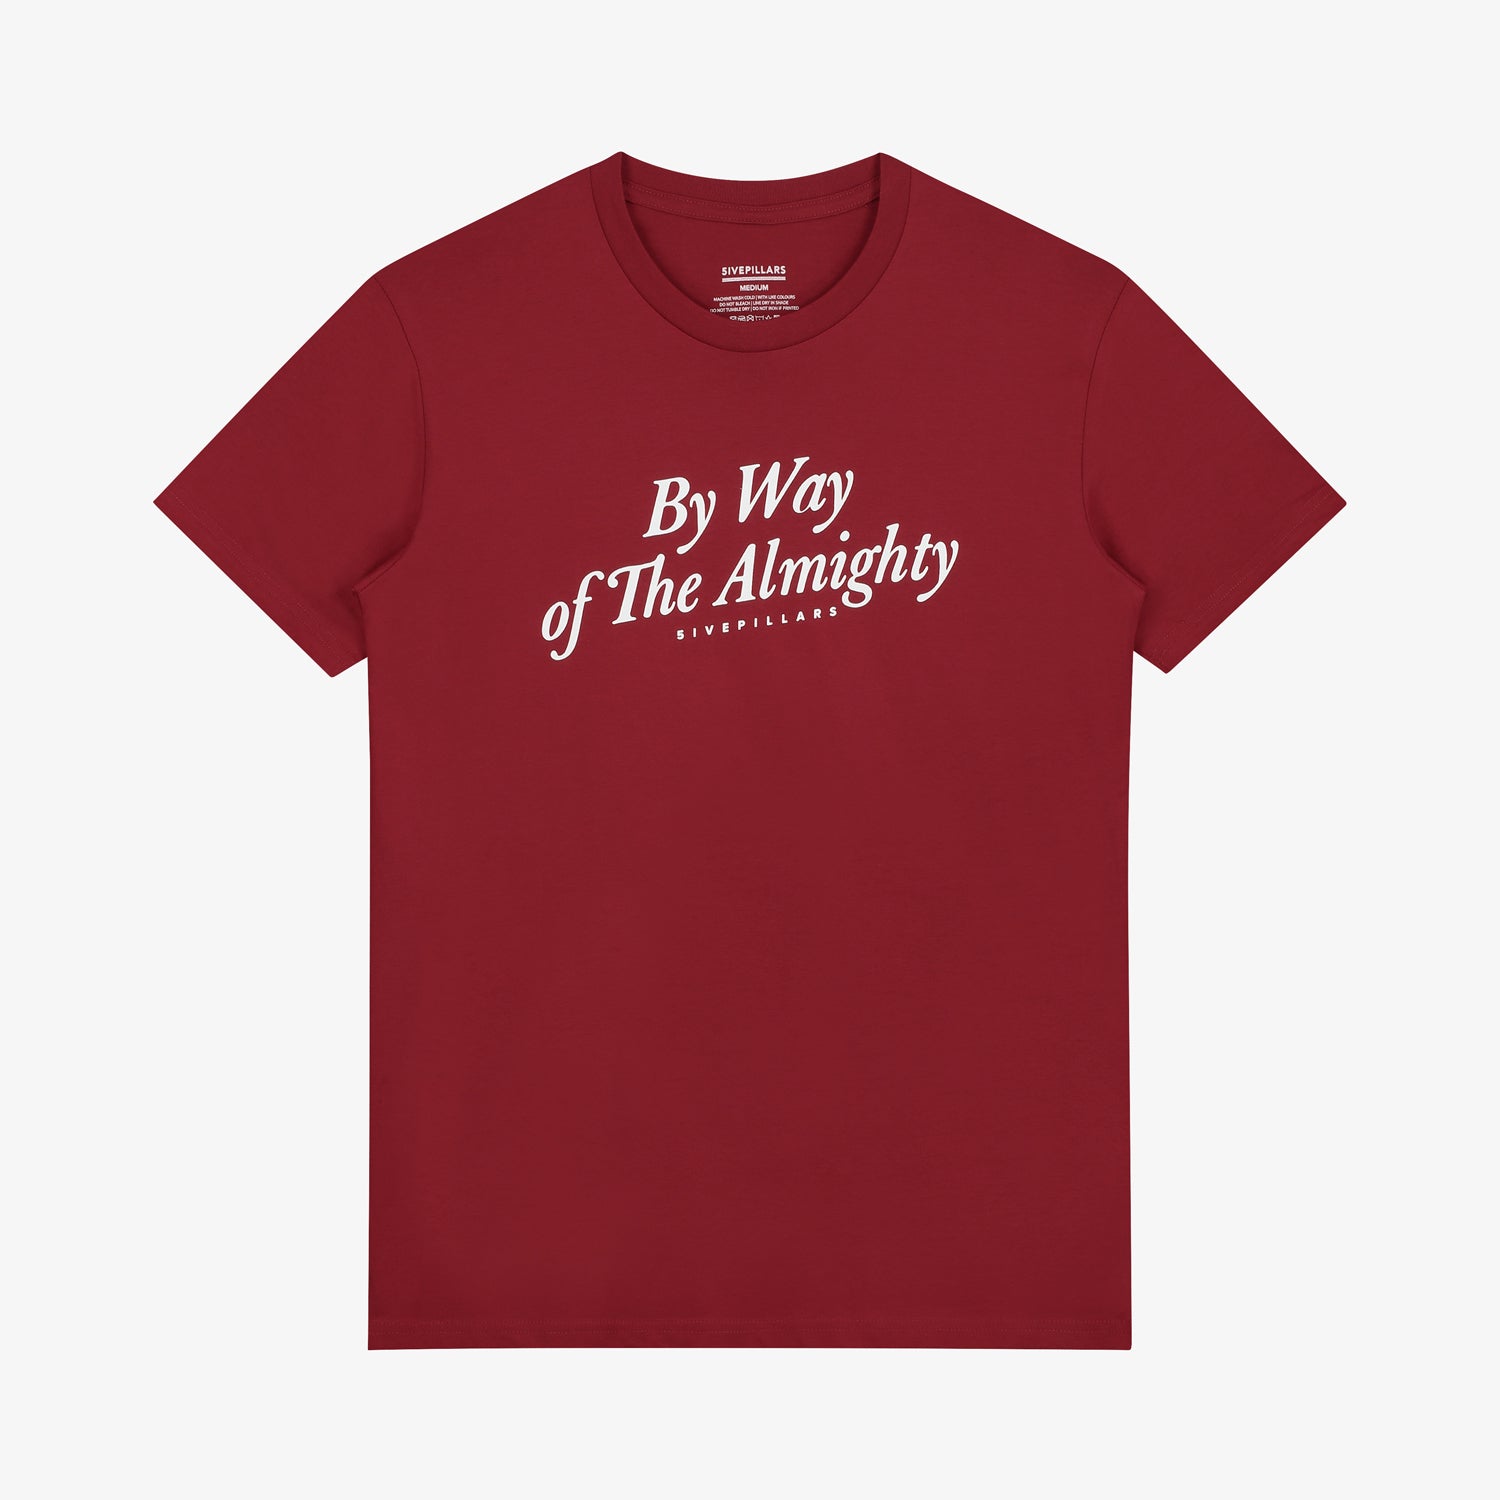 The Almighty Tee - Red